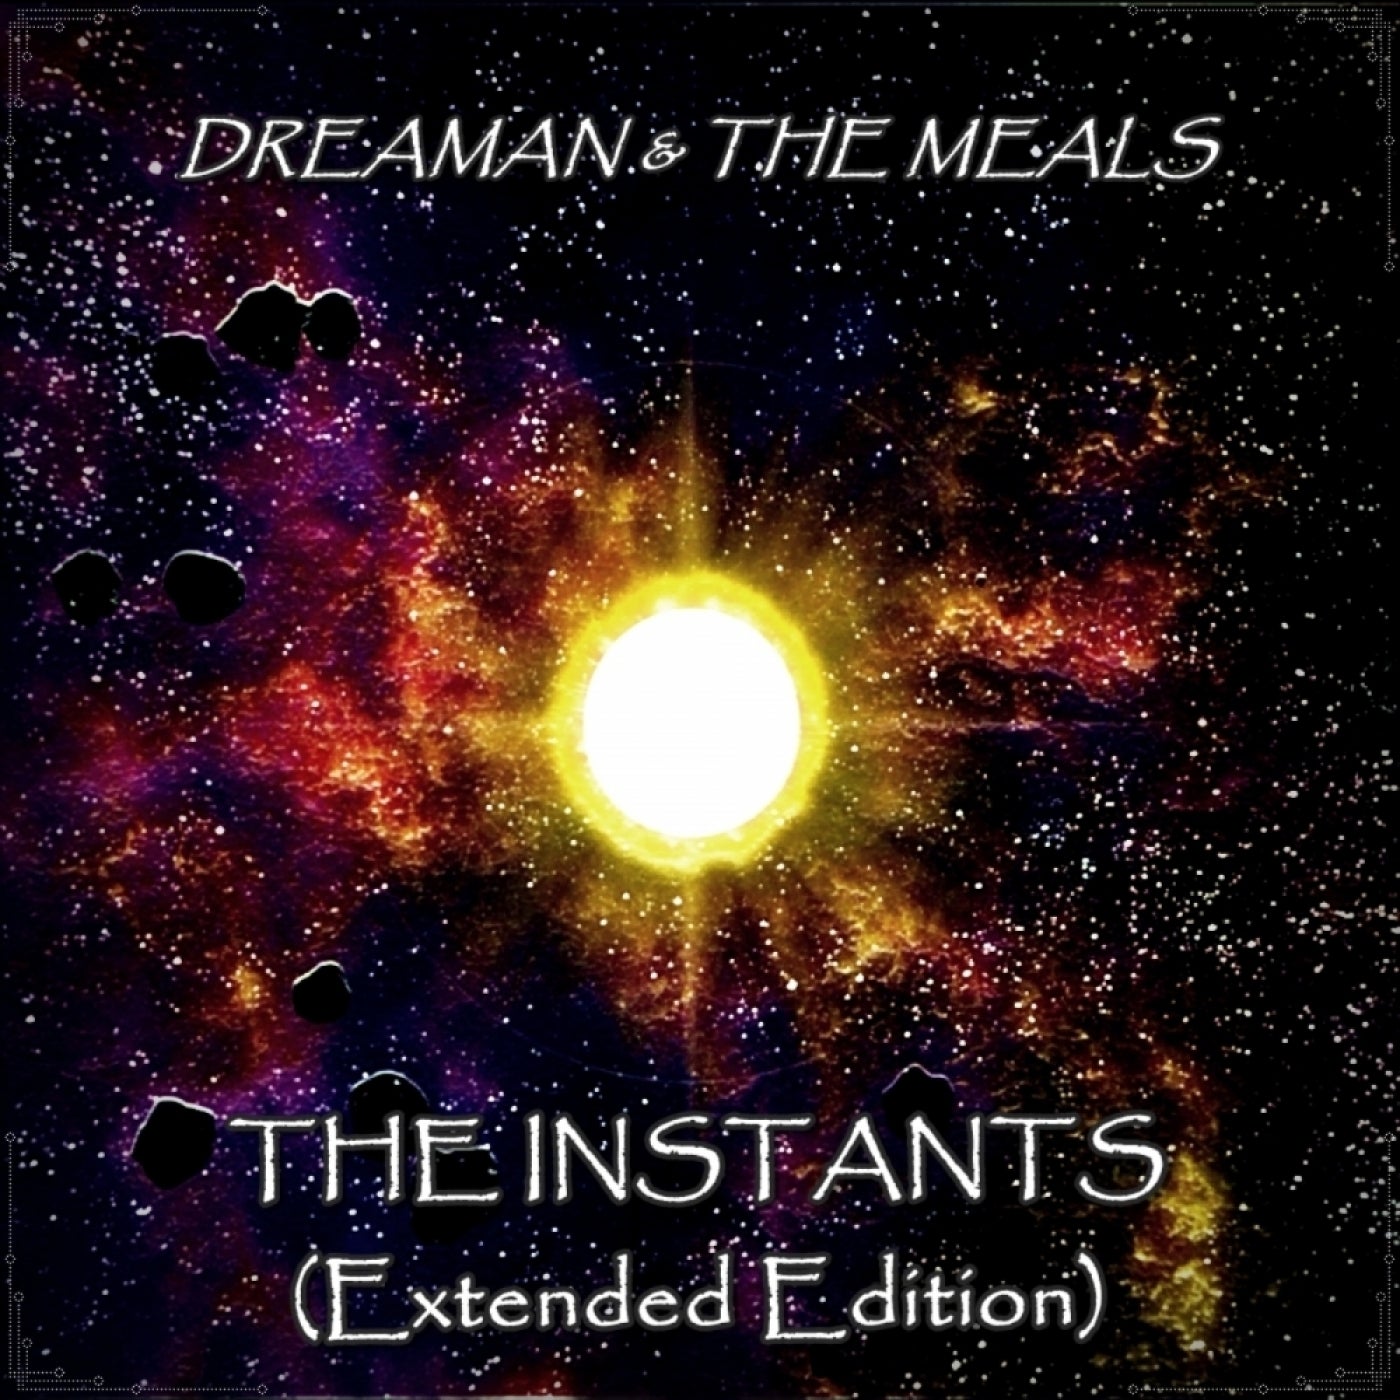 The Instants (Extended Edition)